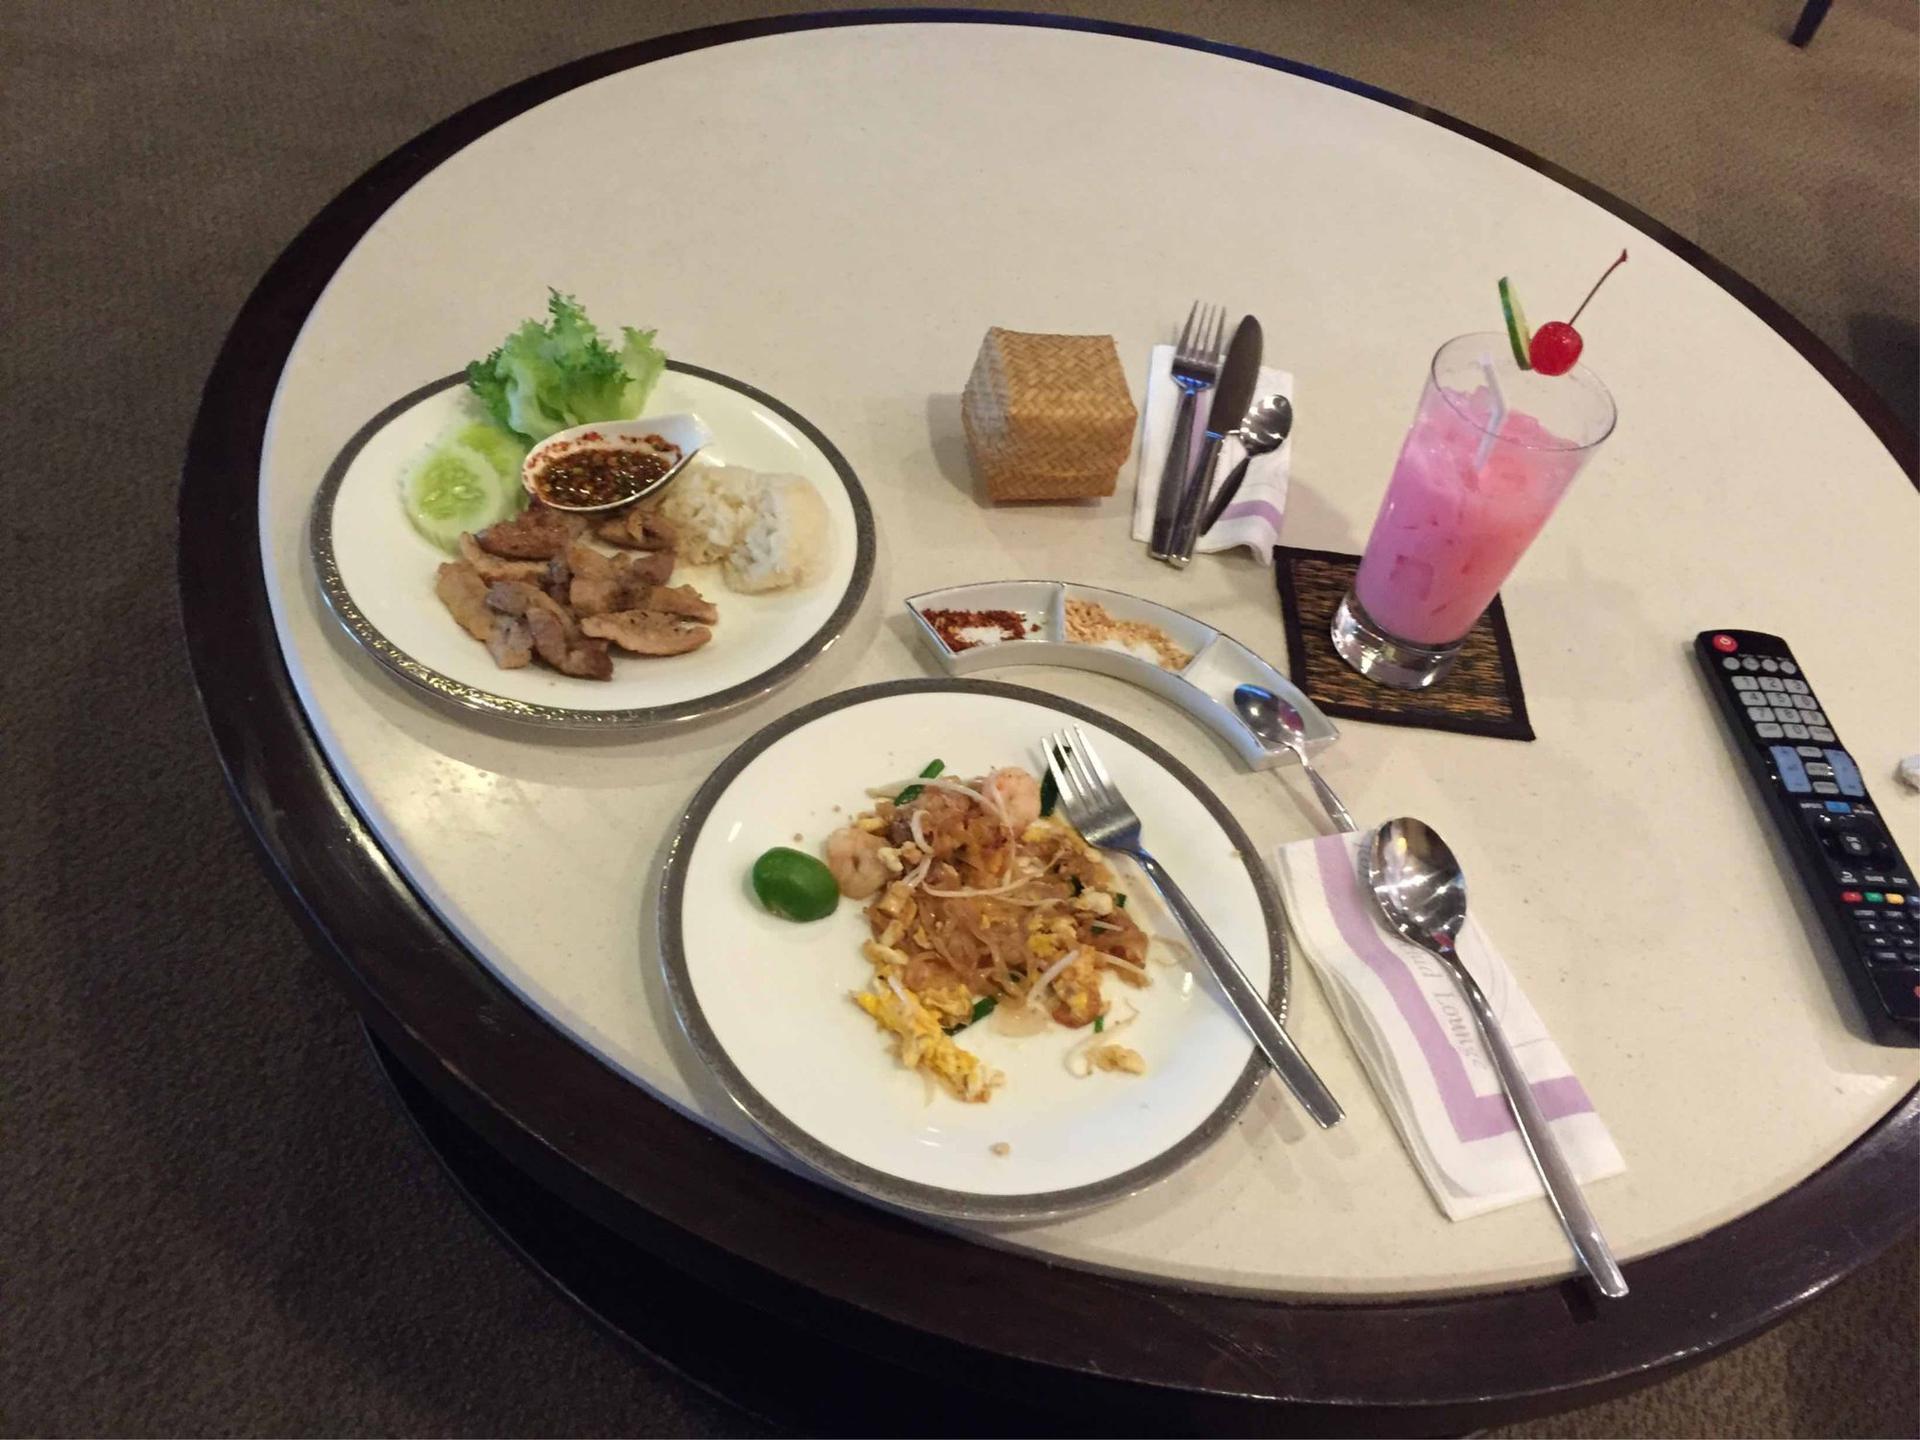 Thai Airways Royal First Class Lounge image 29 of 44